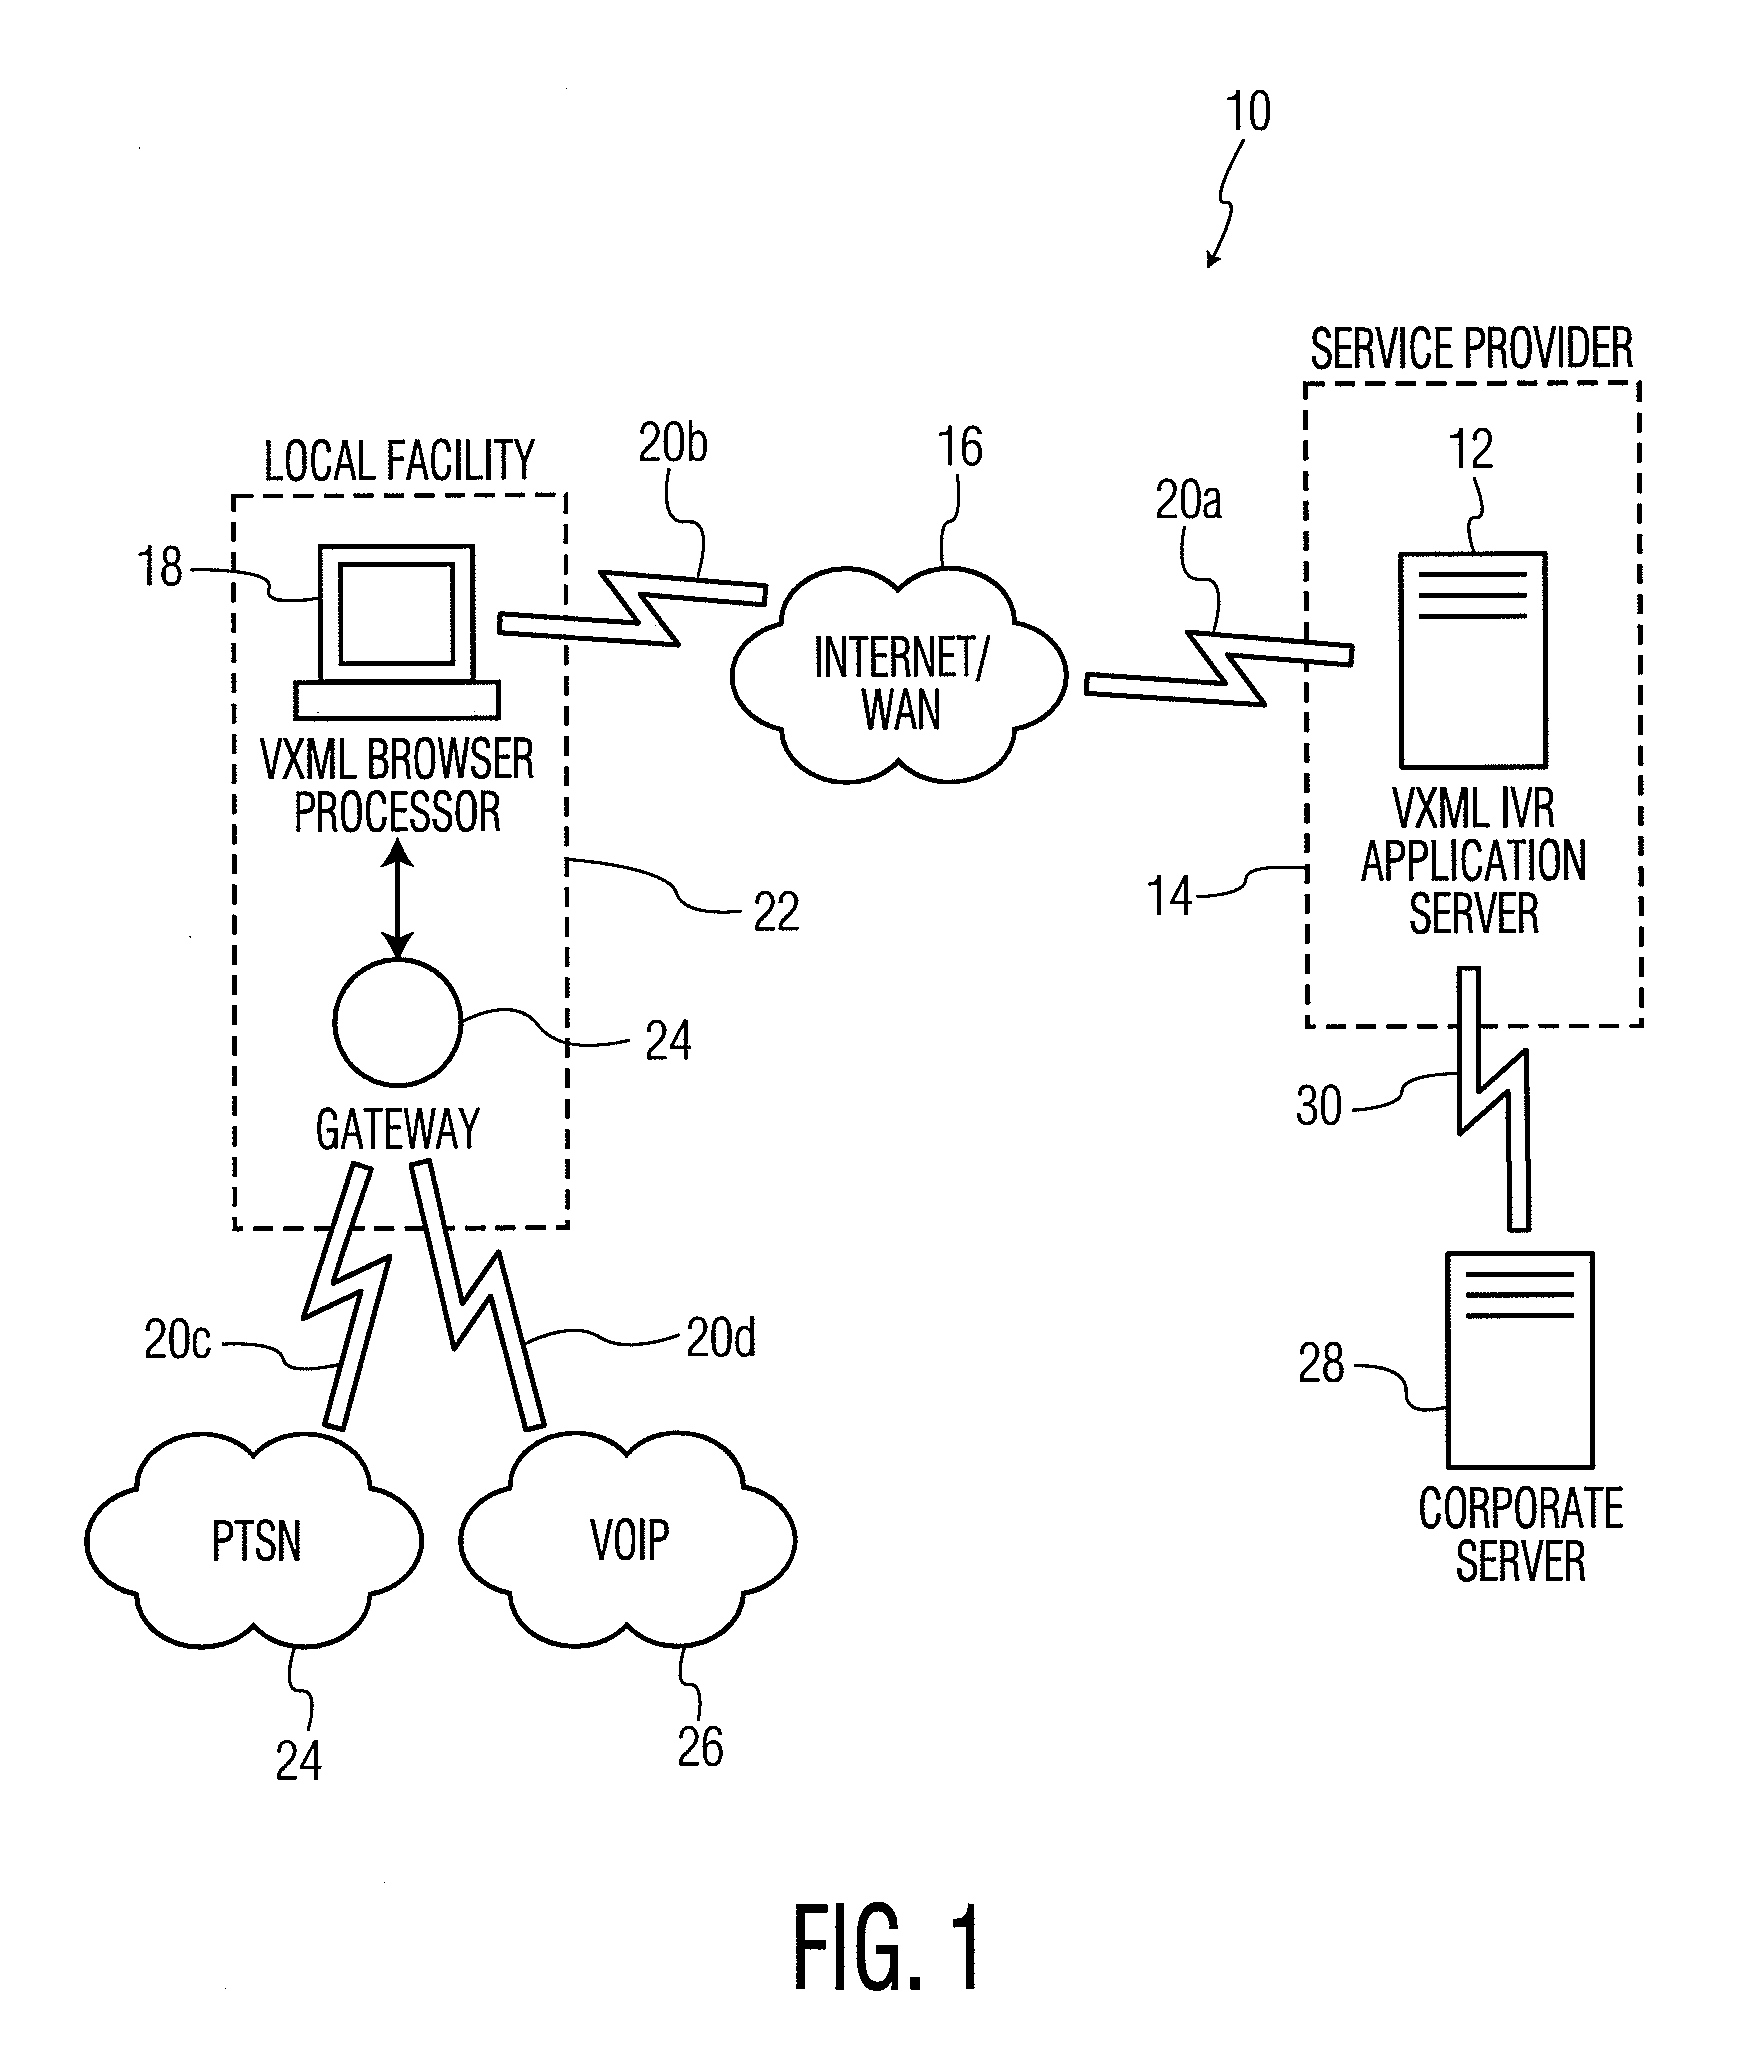 System and method for providing local interactive voice response services